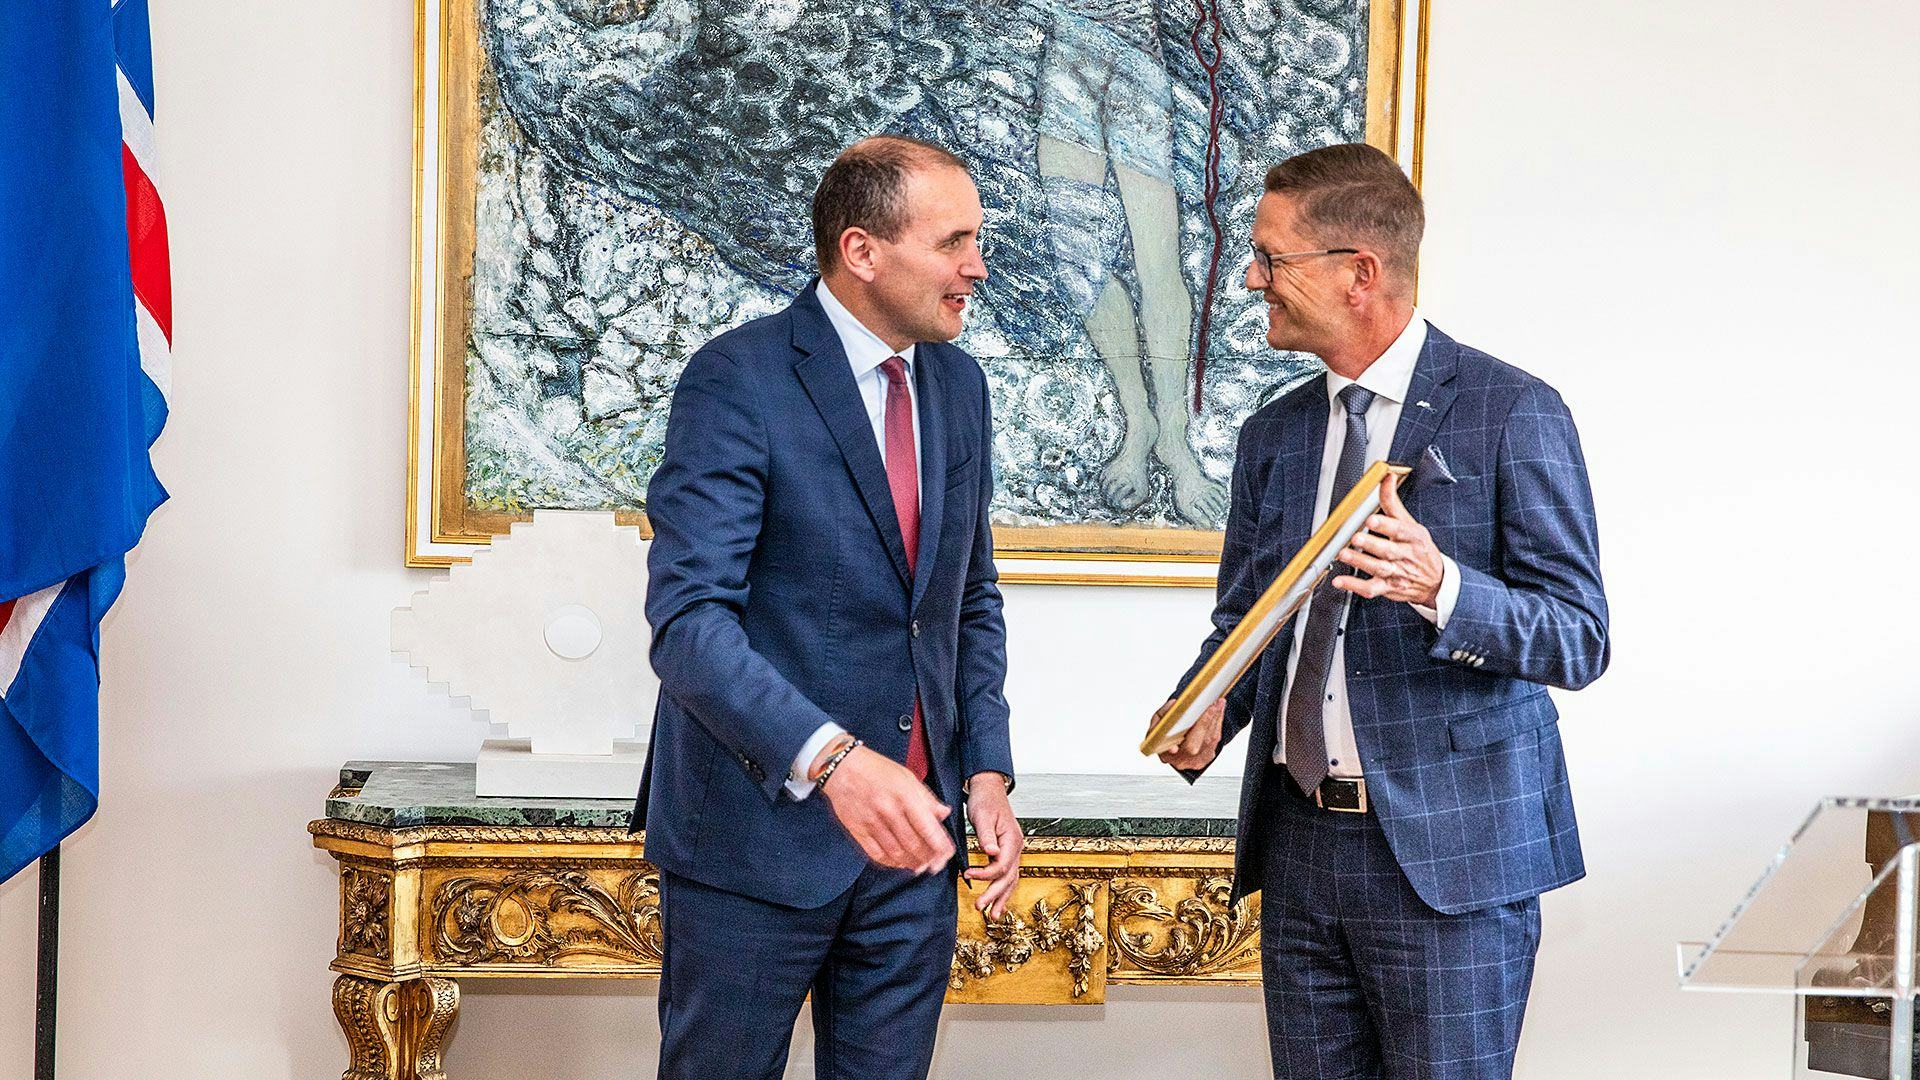 Two men in suits engaging in a conversation, with one holding a frame in a room with an abstract painting in the background